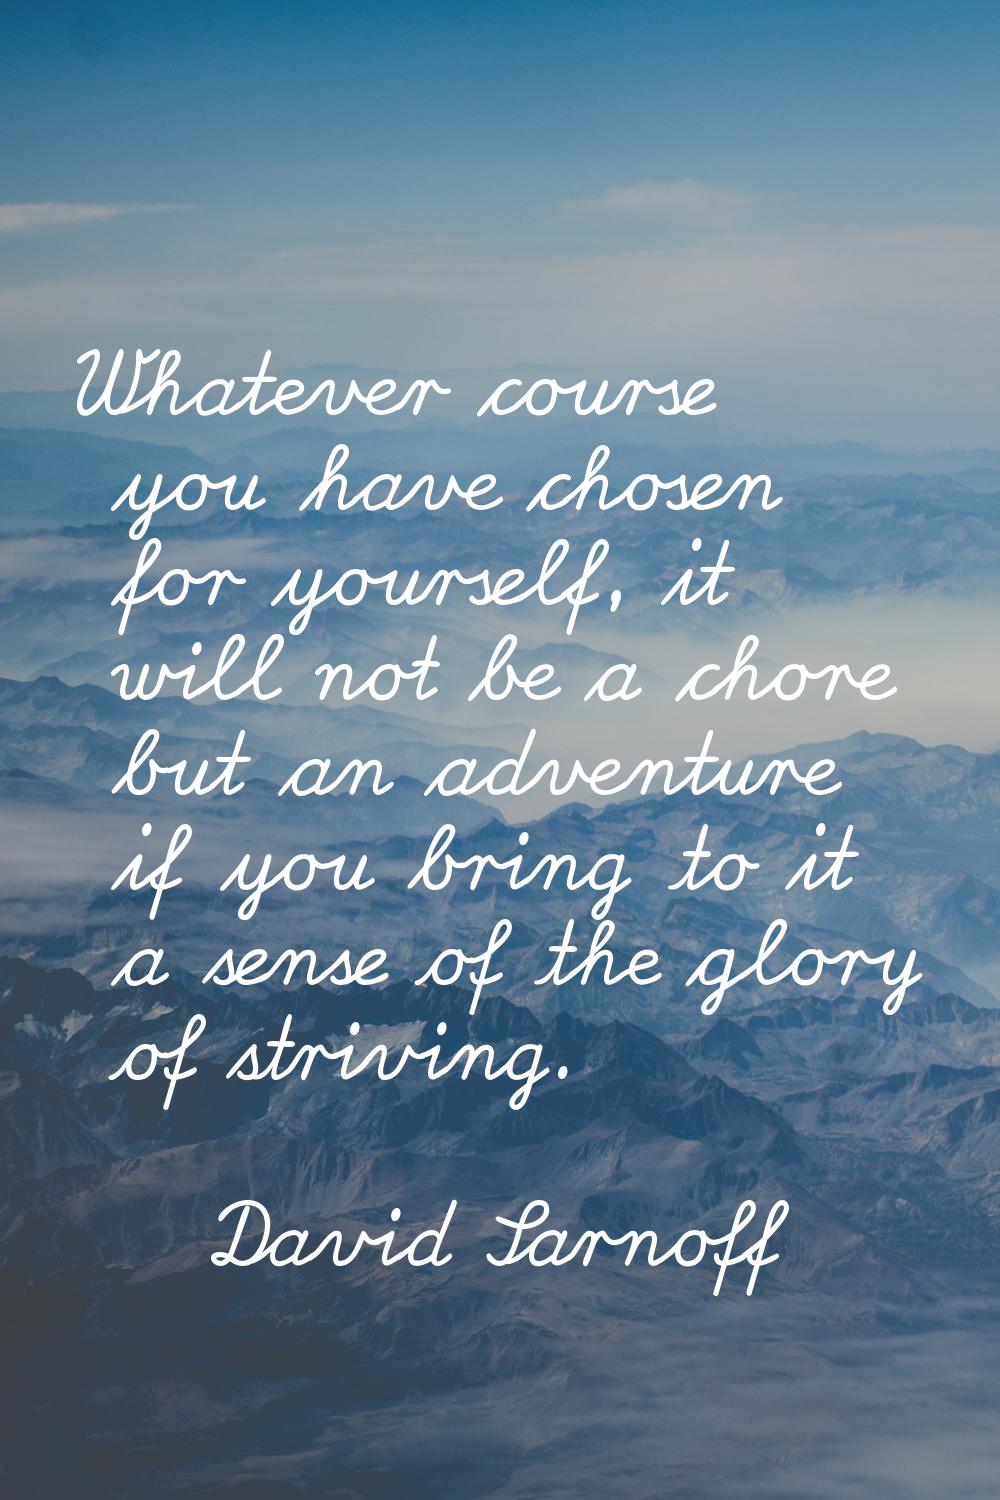 Whatever course you have chosen for yourself, it will not be a chore but an adventure if you bring 